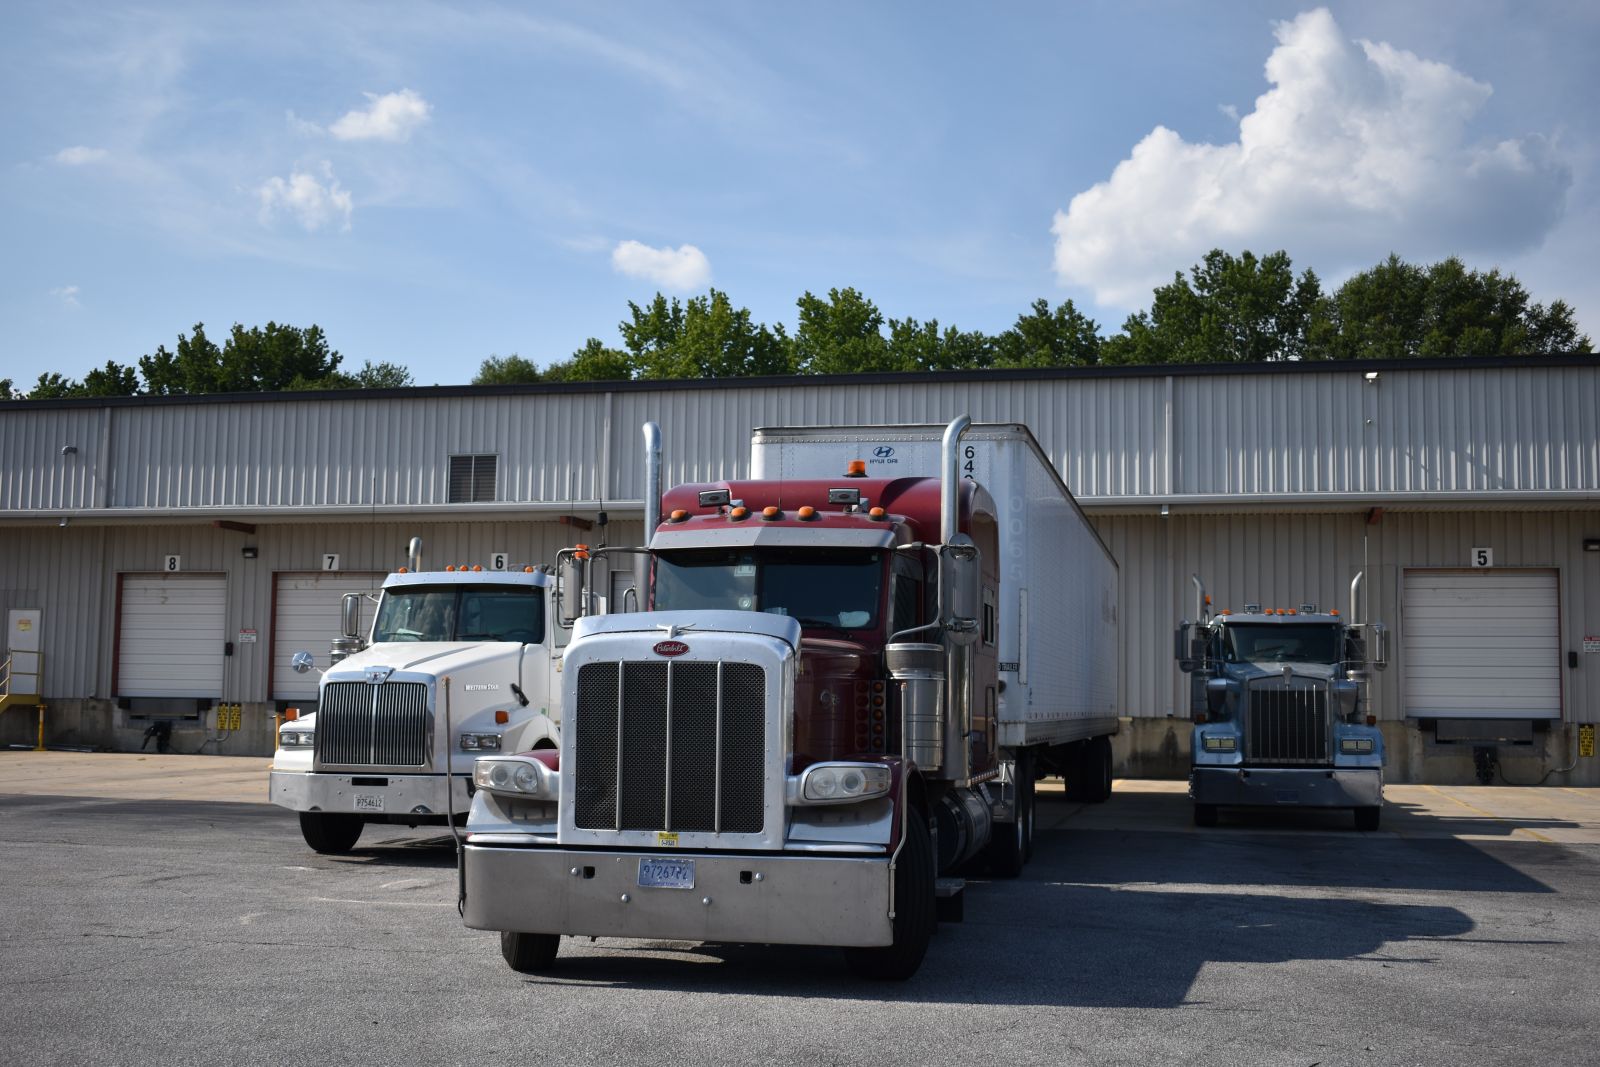 A red tractor with a night cab is parked beside two day cabs. The trucks are part of Swafford's 20-tractor and 250-trailer fleet. (Photo/Molly Hulsey)